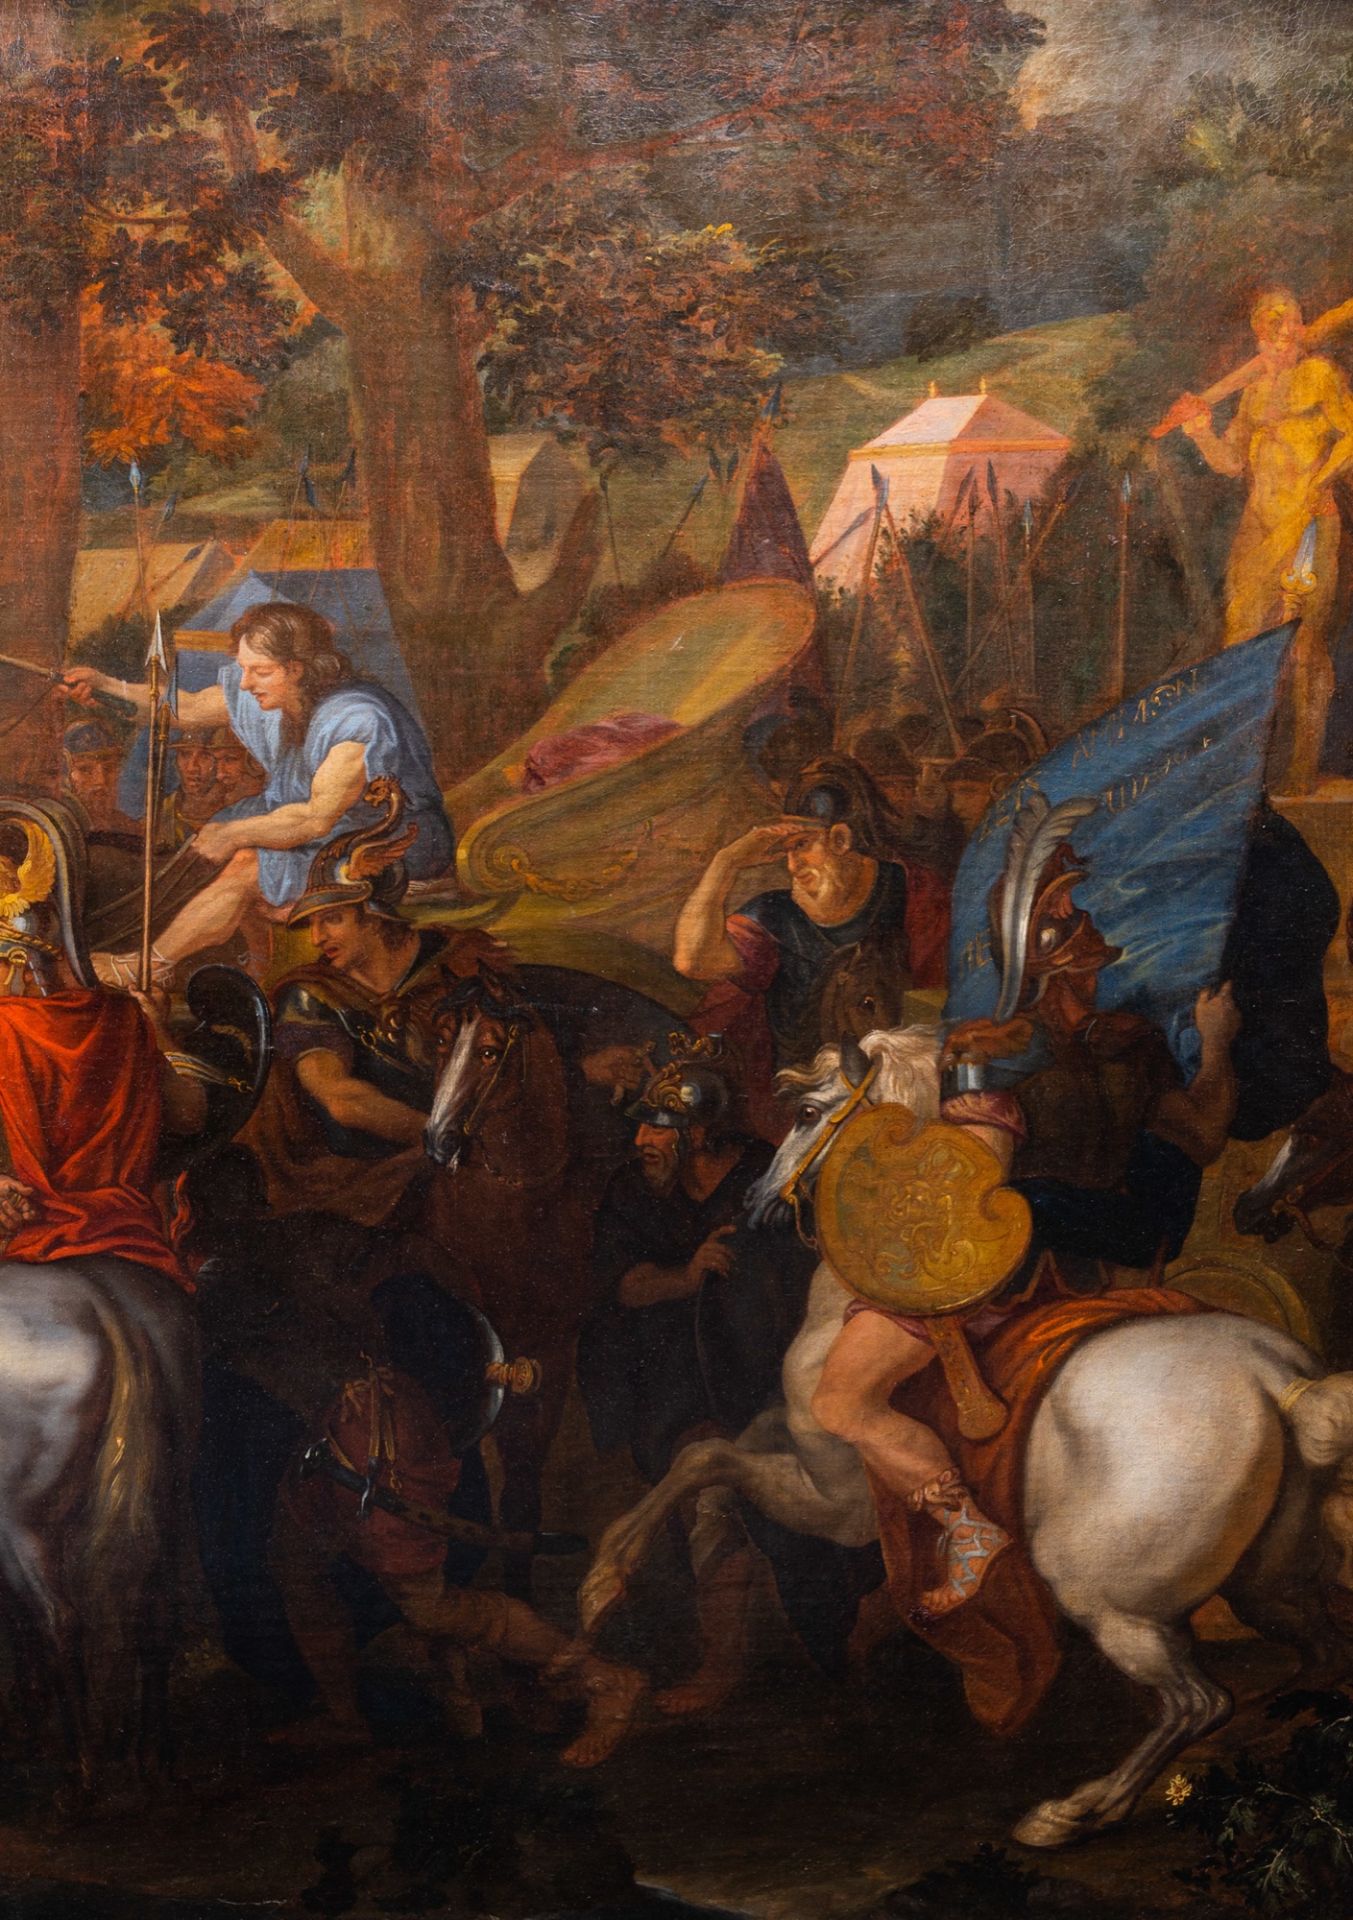 French school, workshop of Charles le Brun (1619-1690): Alexander and Poros in the Battle of Hydaspe - Image 6 of 24